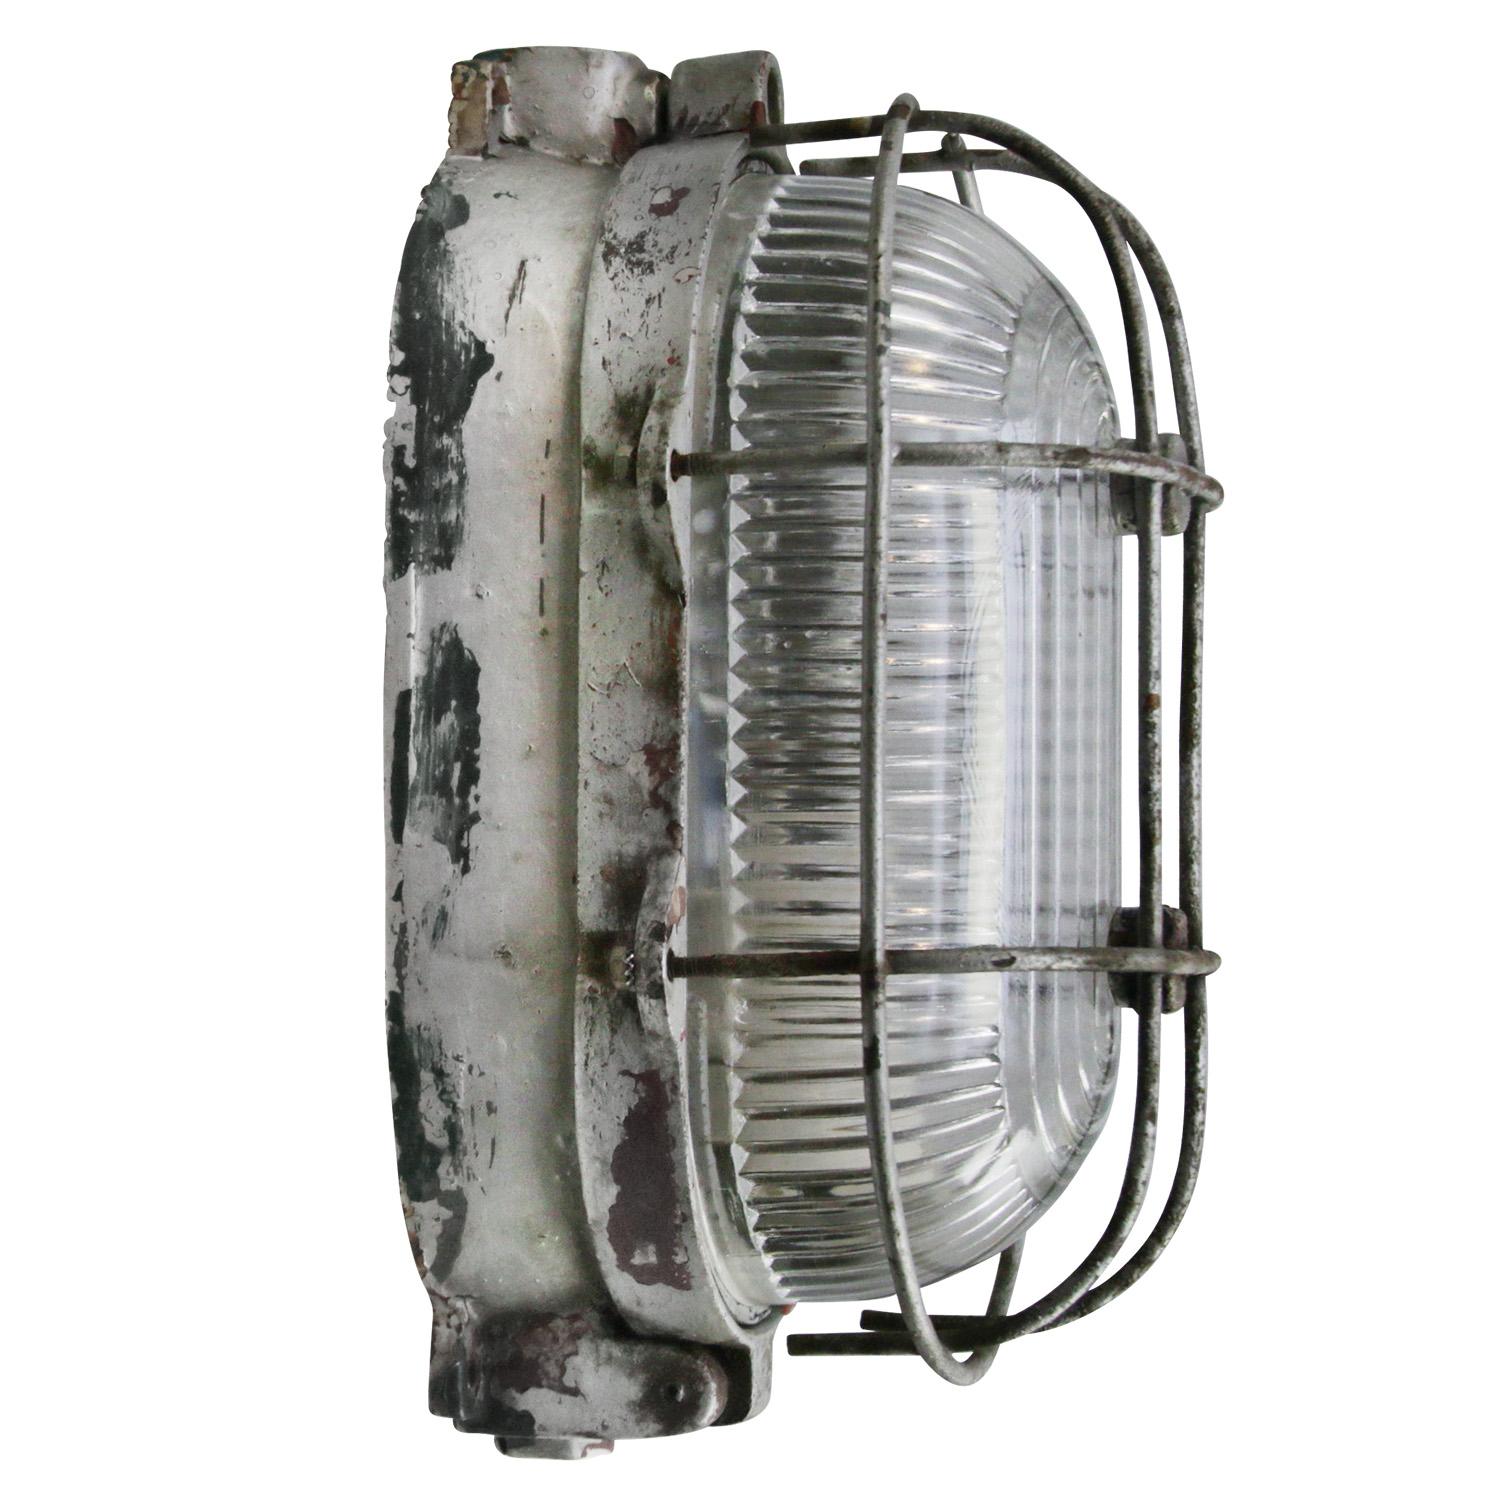 Industrial wall or ceiling lamp
Cast iron, clear Holophane glass

Weight: 3.70 kg / 8.2 lb

Priced per individual item. All lamps have been made suitable by international standards for incandescent light bulbs, energy-efficient and LED bulbs.